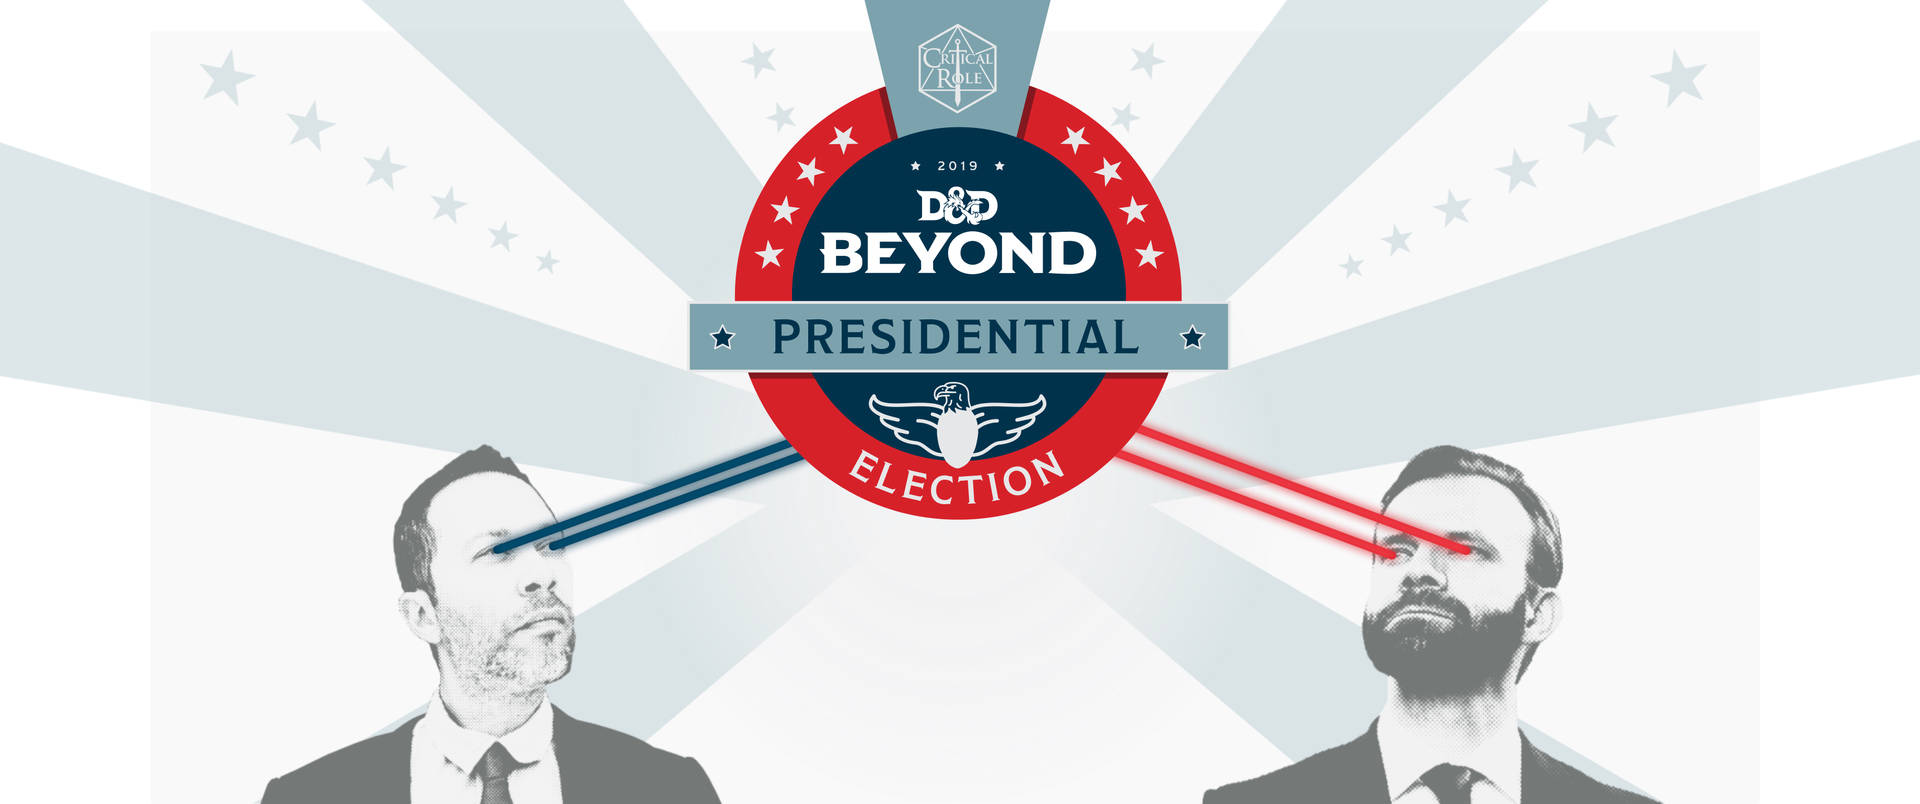 D&d Beyond Presidential Election Background